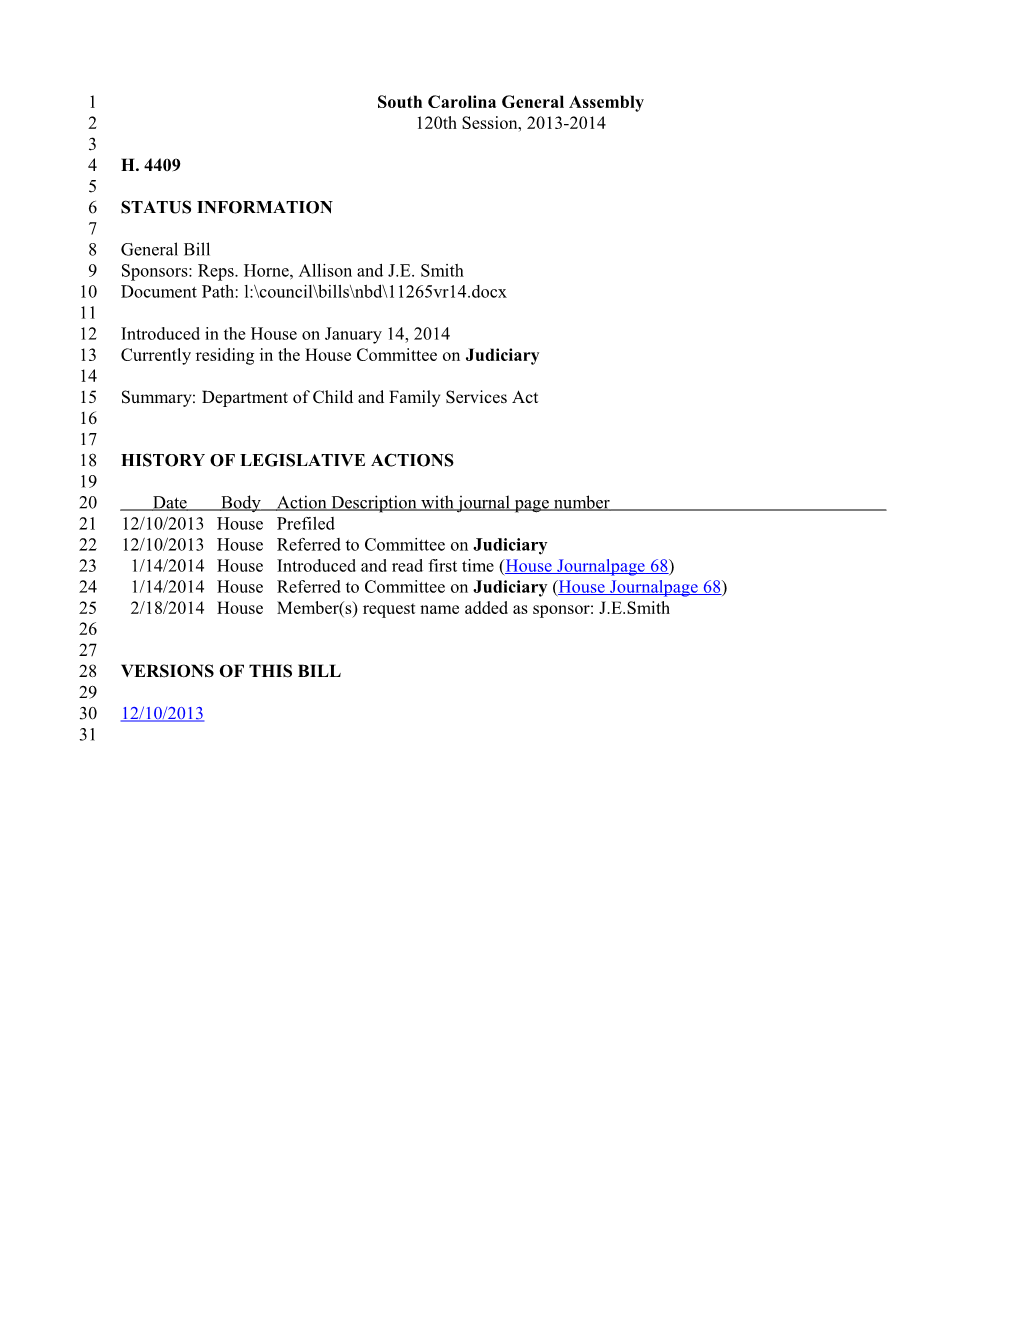 2013-2014 Bill 4409: Department of Child and Family Services Act - South Carolina Legislature